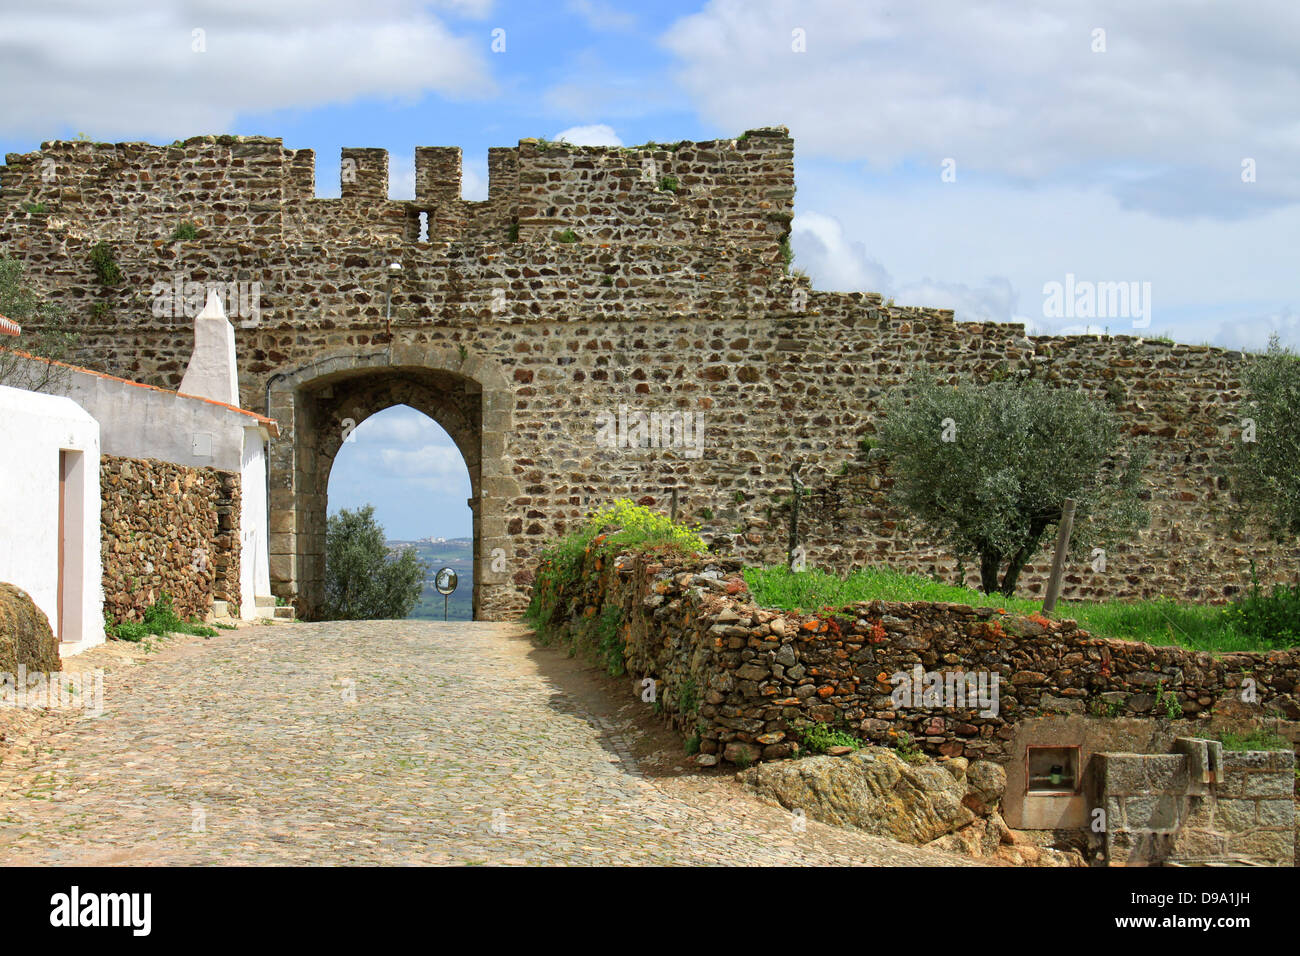 Fortification walls and entrance in a street of Evoramonte, , Alantejo, Portugal Stock Photo